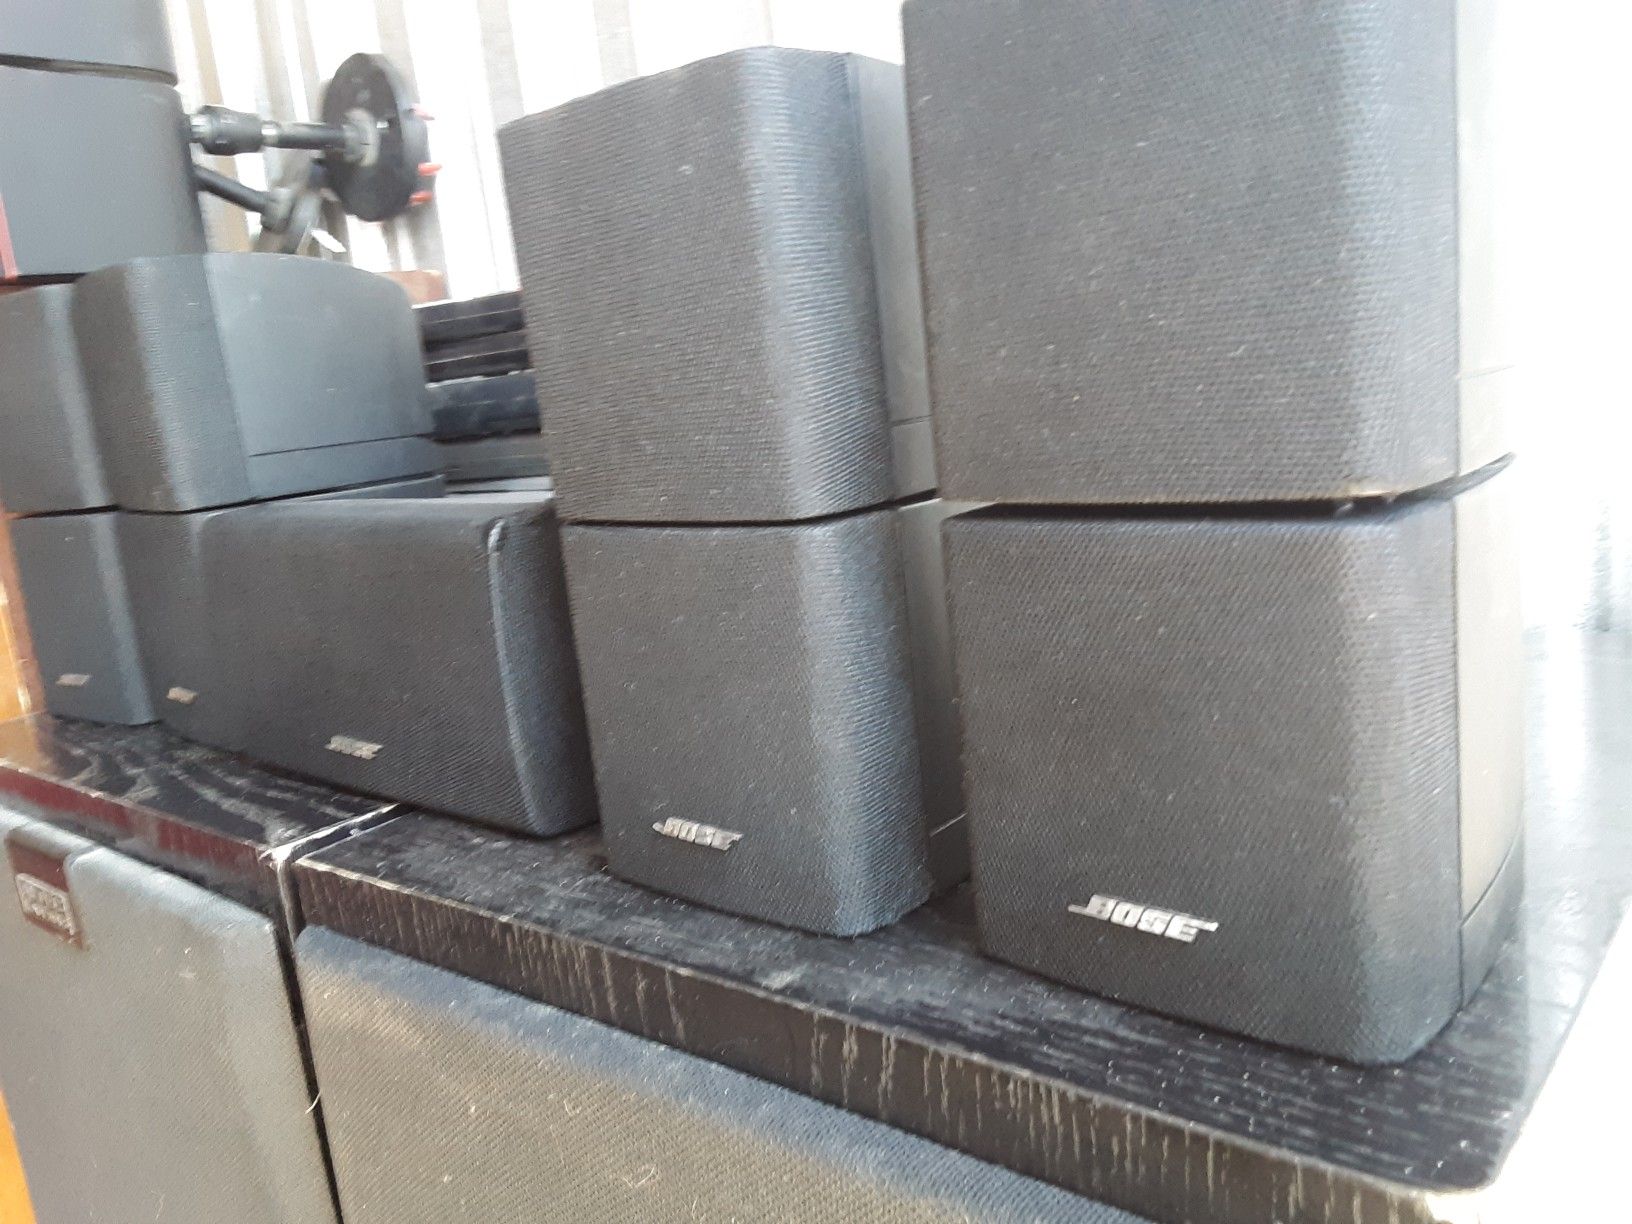 BOSE SURROUND SOUND CUBE SPEAKERS and SUBWOOFER